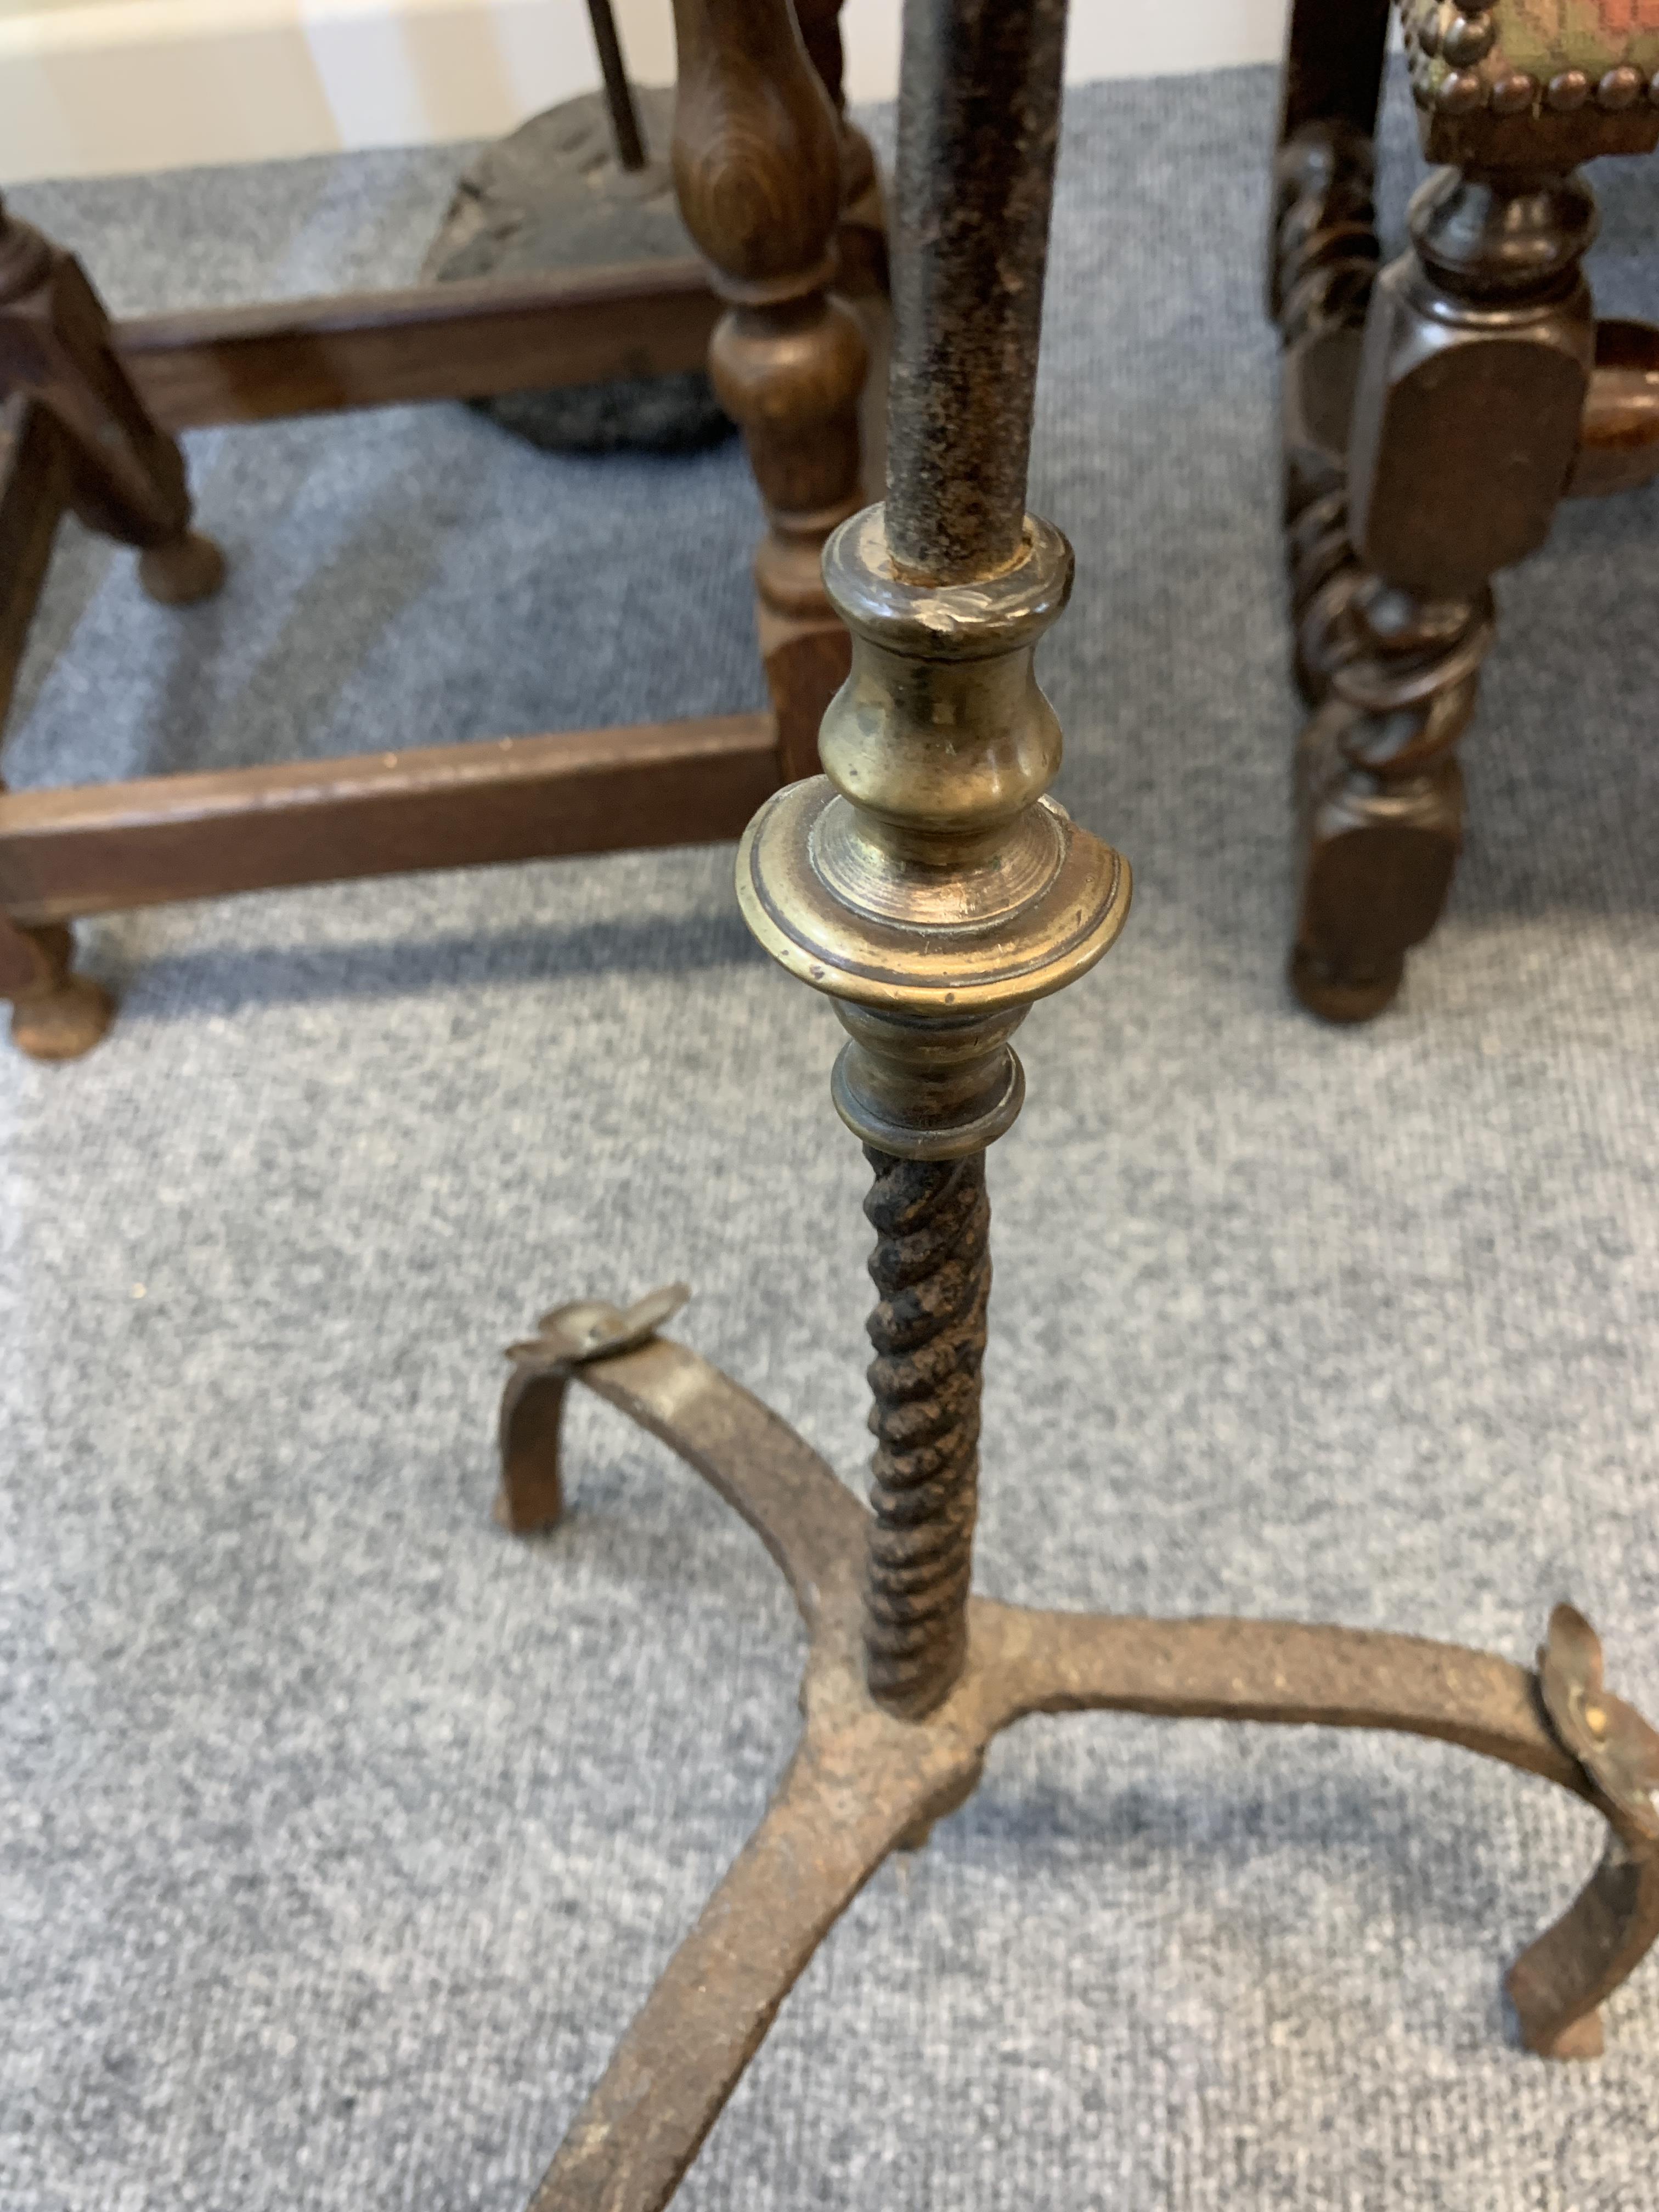 A WROUGHT IRON AND BRASS MOUNTED STANDING CANDLE HOLDER 18TH CENTURY with a turned acorn finial - Image 7 of 15